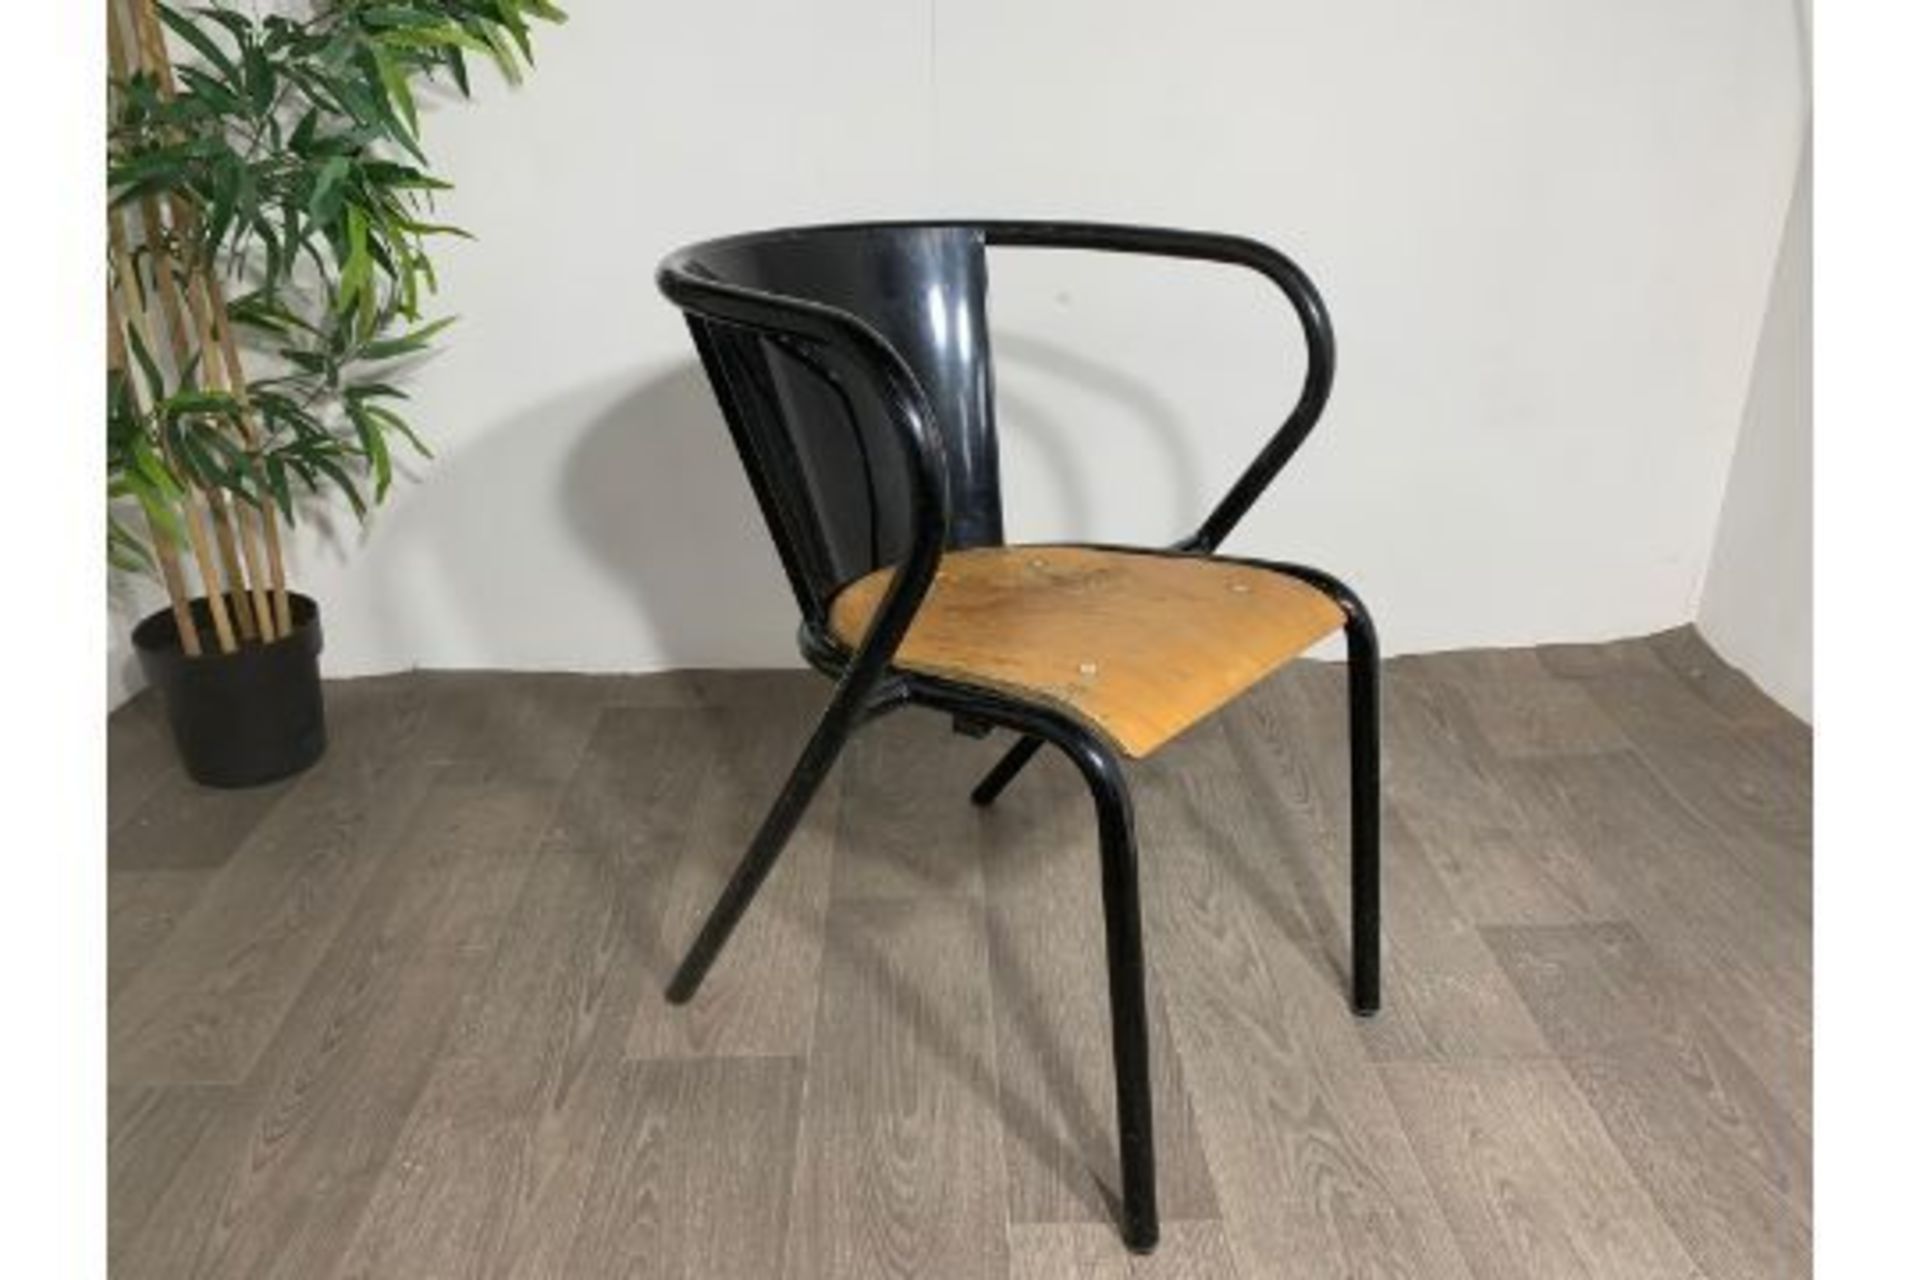 Adico 5008 Black Chair With Wooden Seat x4 - Image 2 of 6